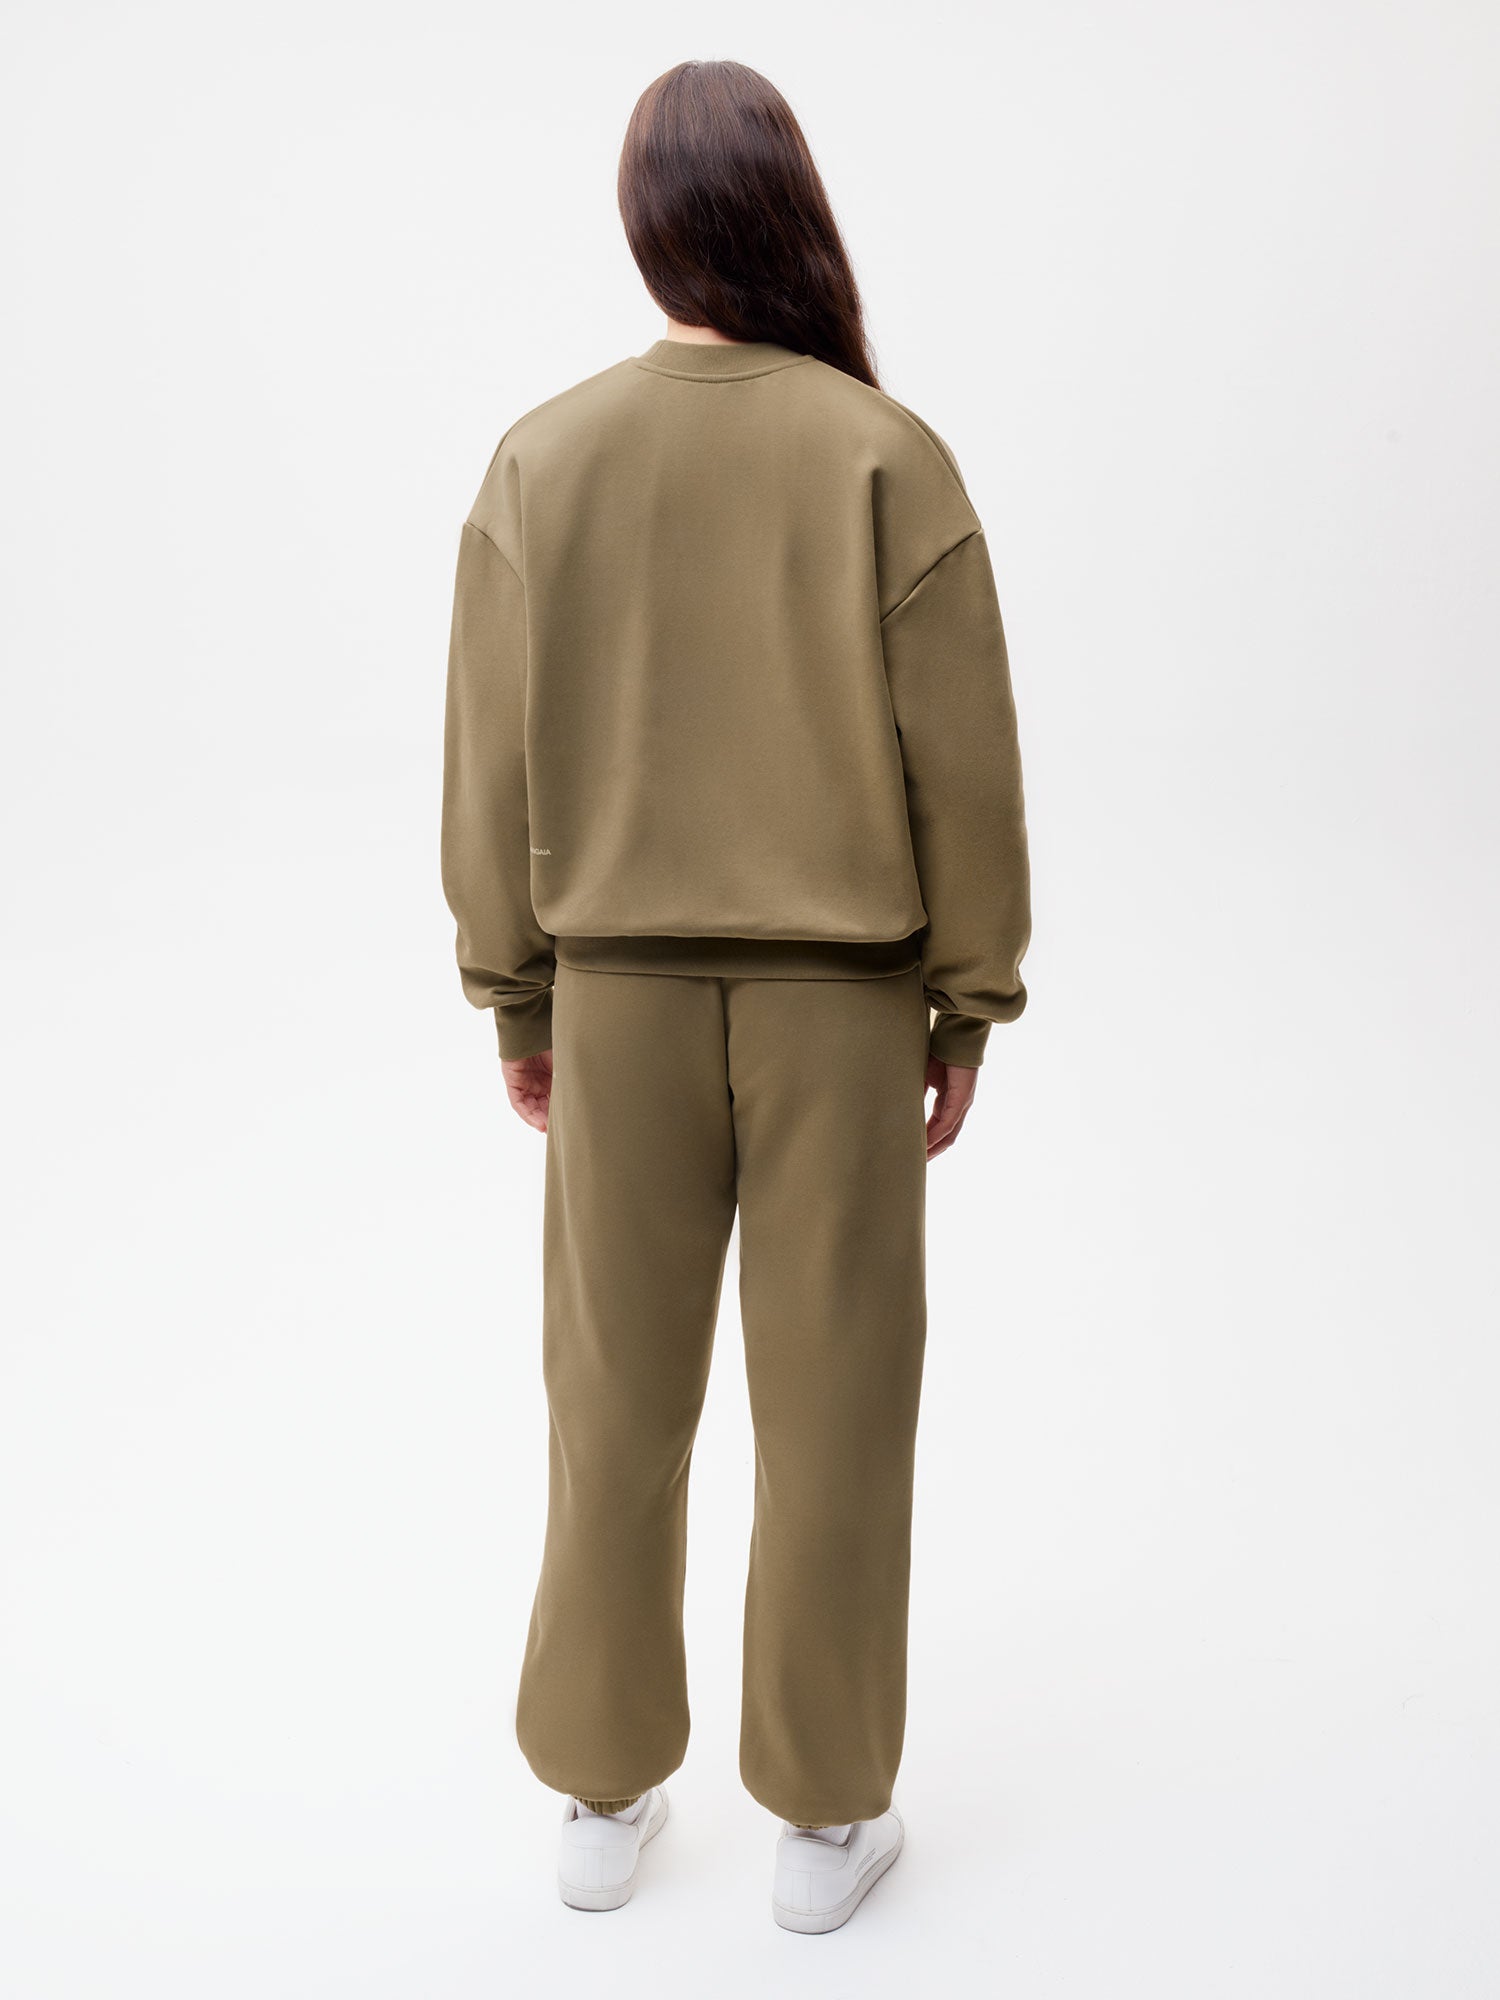 In-Conversion-Cotton-Track-Pants-Carbon-Brown-Female-2